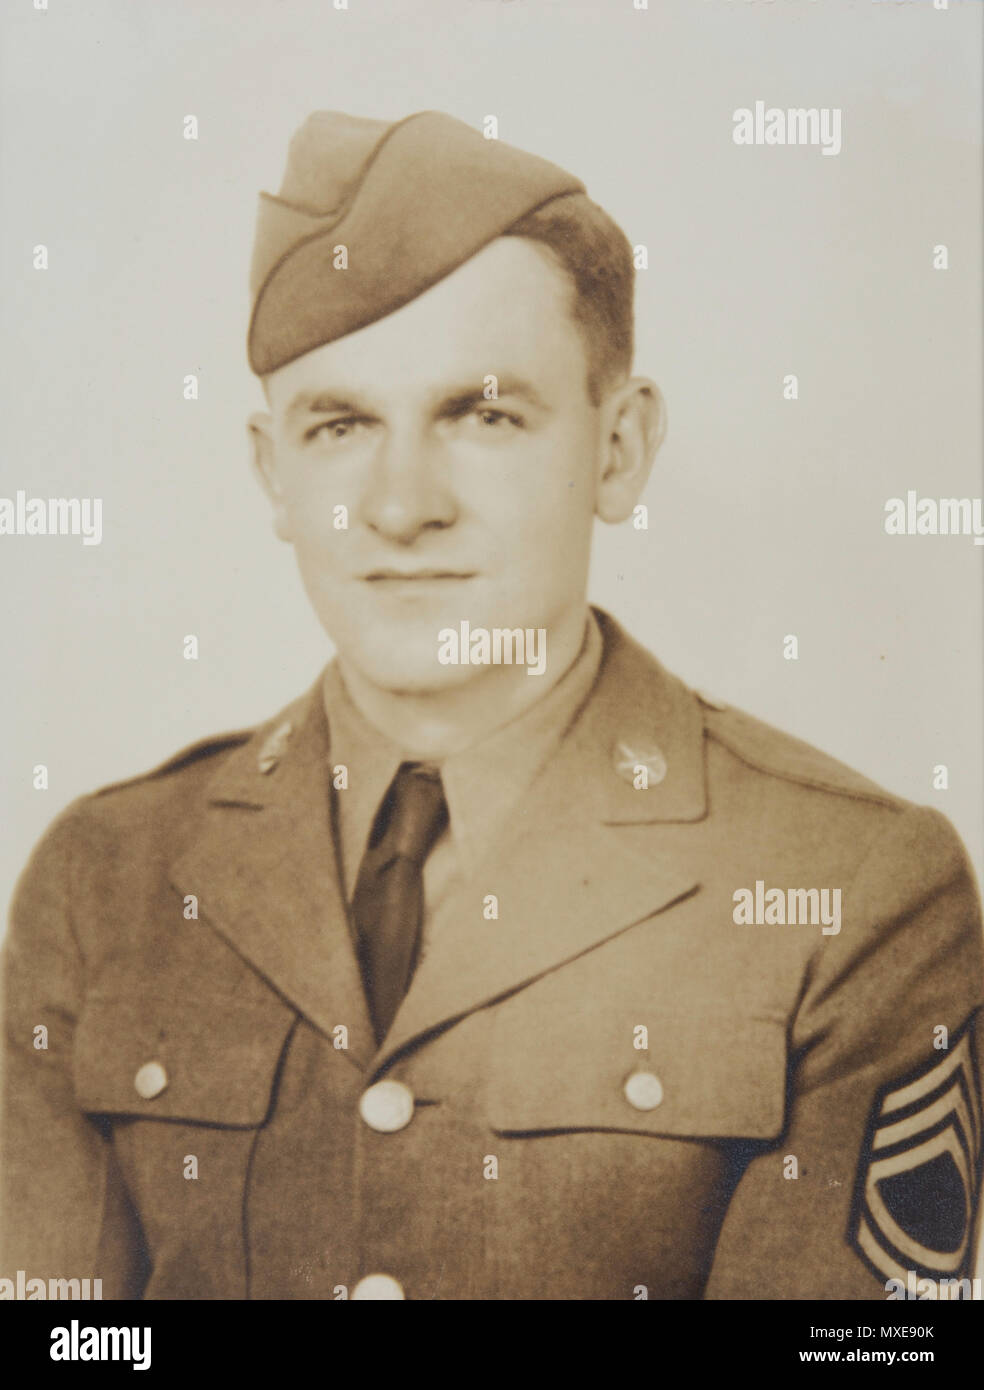 Vintage Portrait Photograph of United States Military non-Comissioned Officer in the 1940s, USA Stock Photo